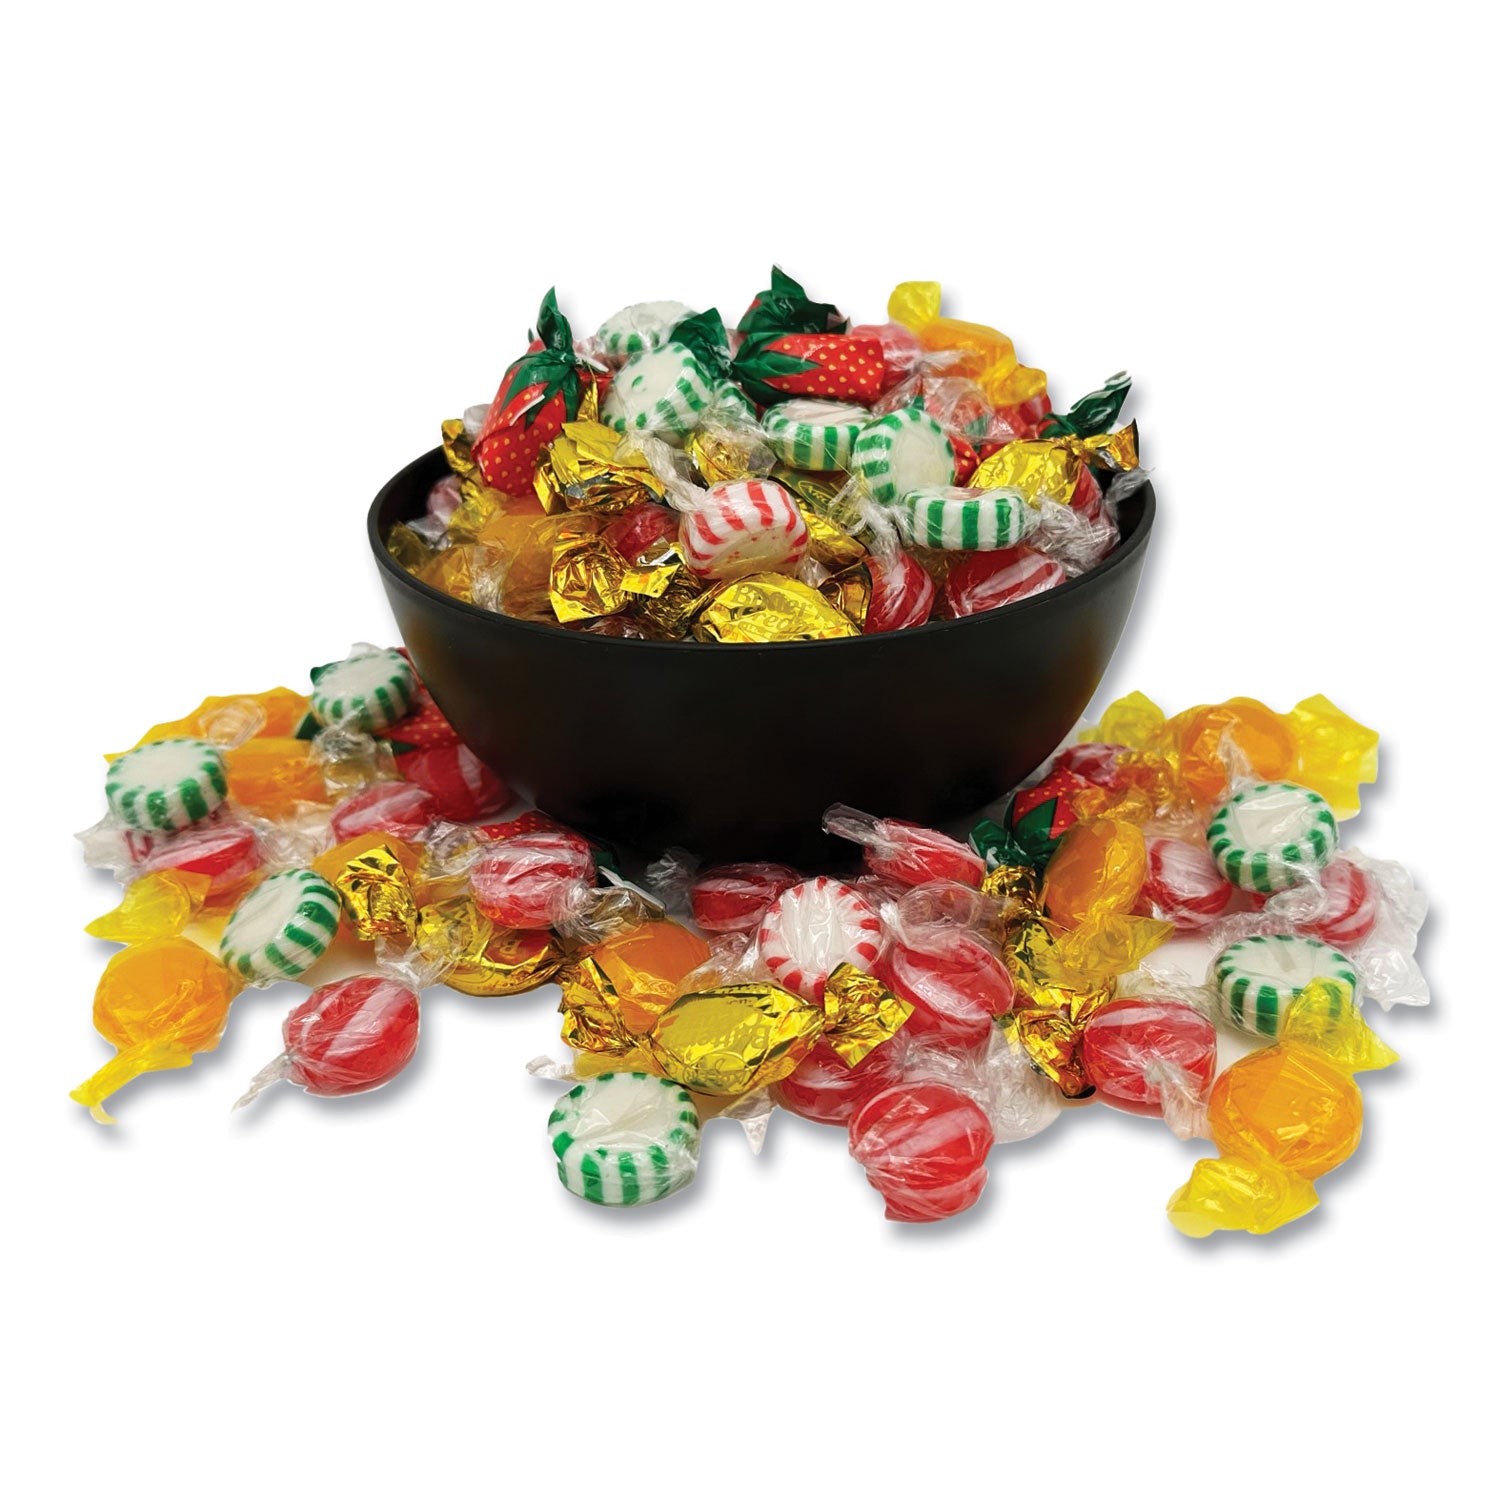 individually-wrapped-candy-assortments-assorted-flavors-5-lb-box_ofx00616 - 3